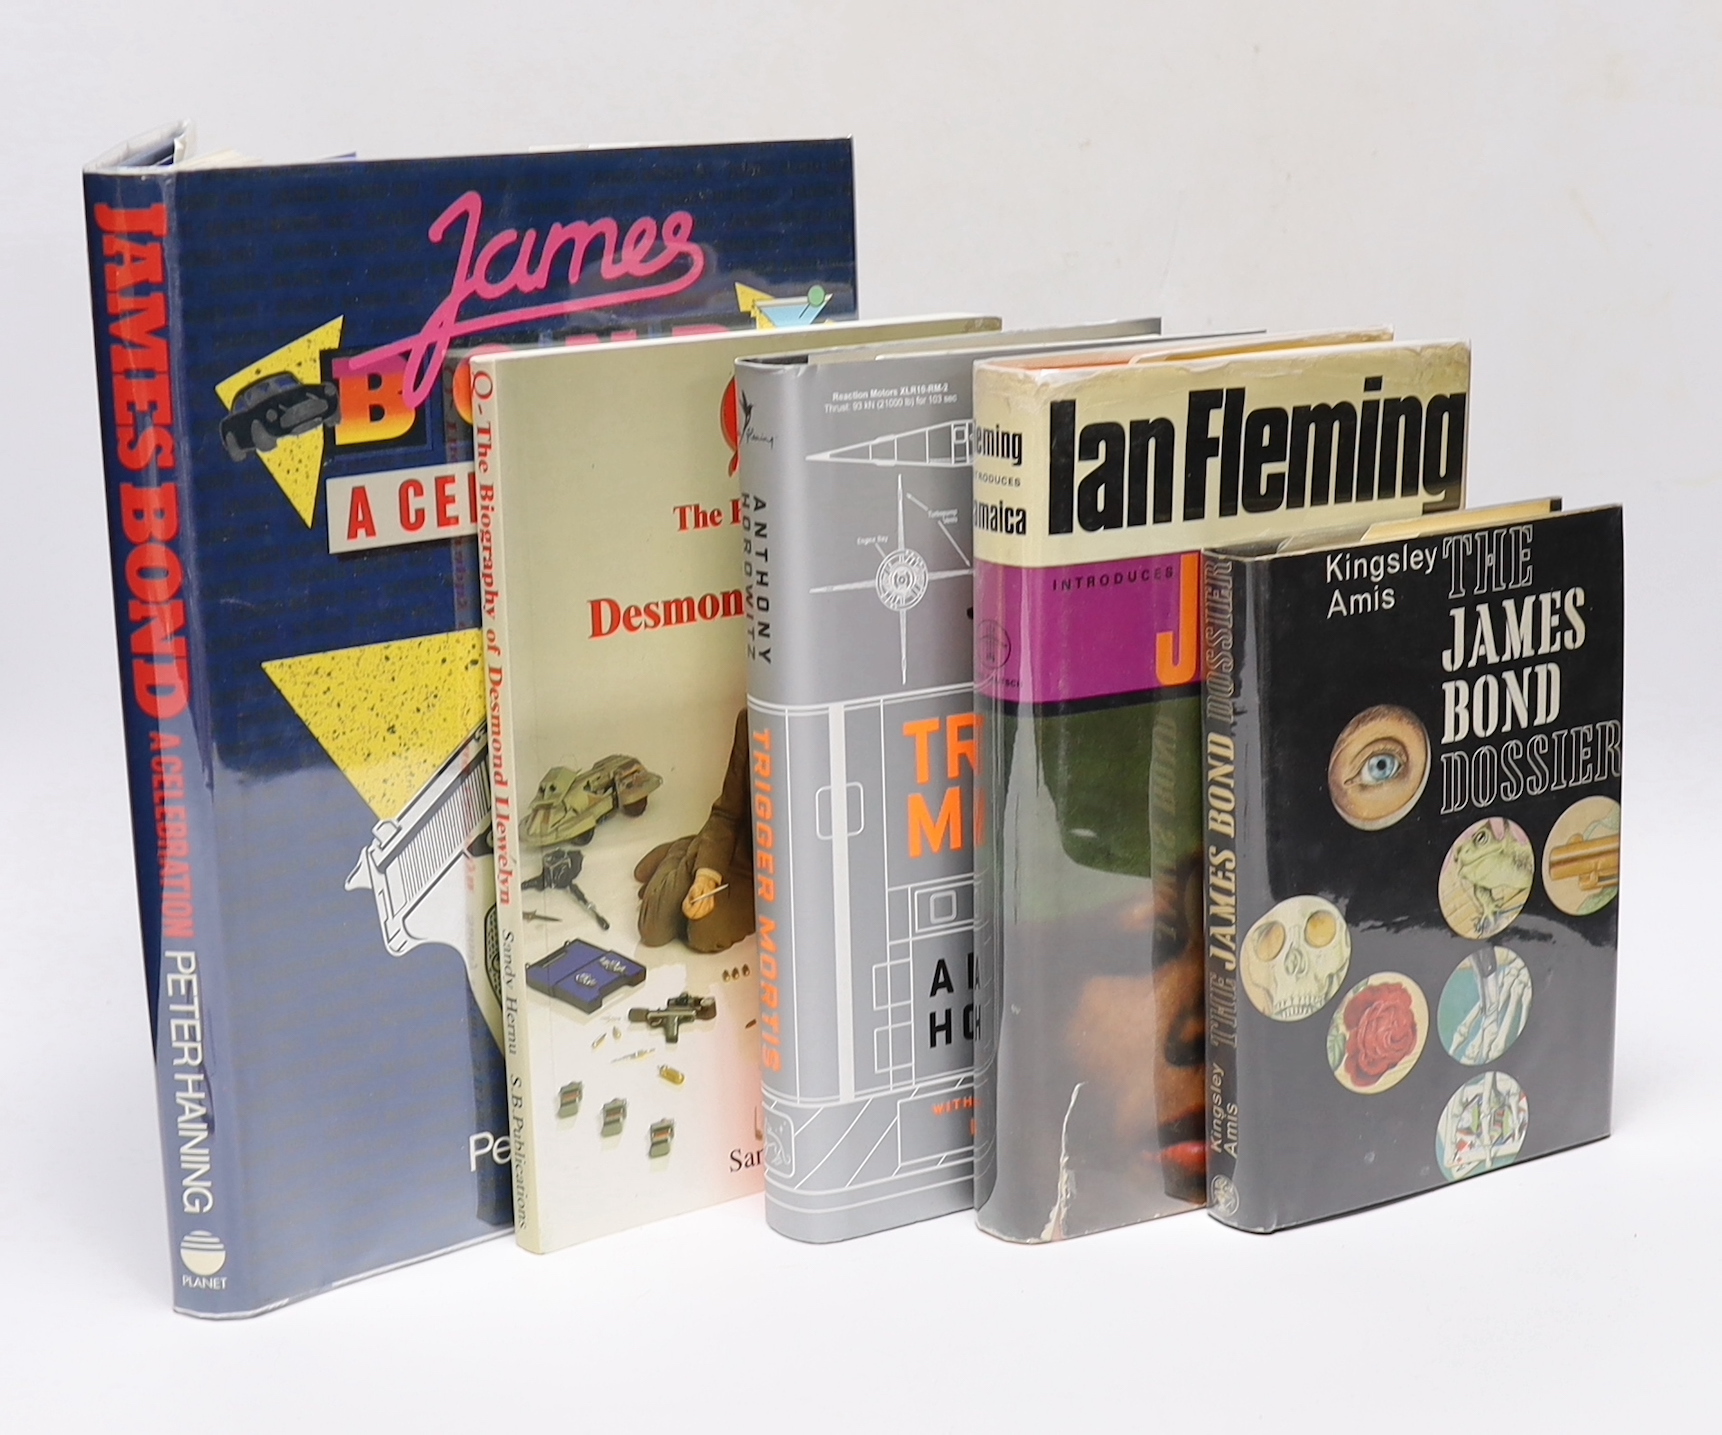 Amis, Kingsley - The James Bond Dossier, with a tipped-in presentation slip, signed by the author, 8vo, black cloth with gilt lettering, with unclipped d/j, Jonathan Cape, London, 1965; Fleming, Ian - Introduces Jamaica,